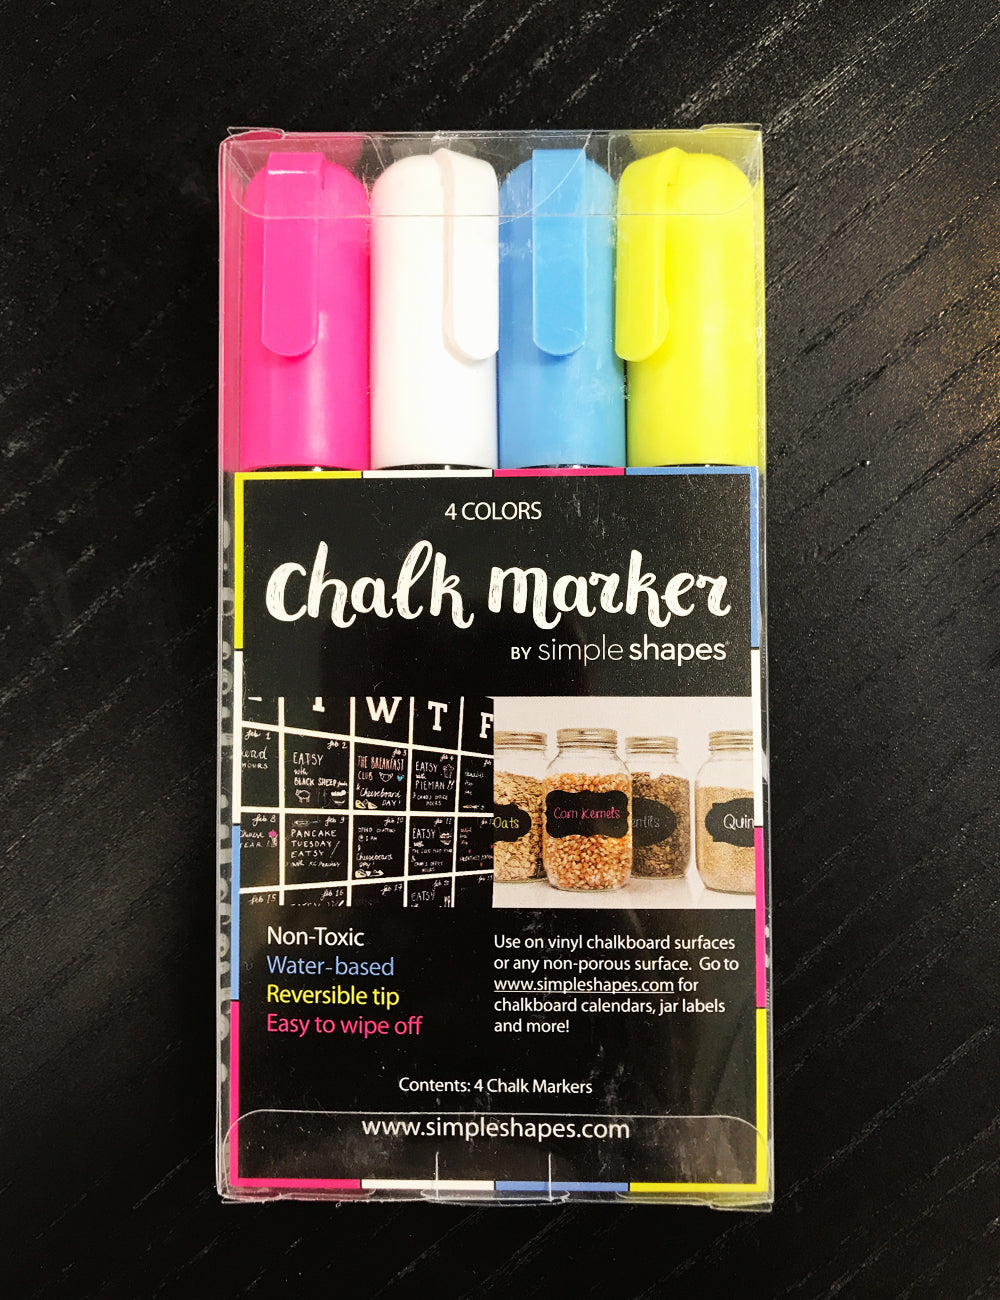 How to Use Liquid Chalk Marker and what surfaces to use it on